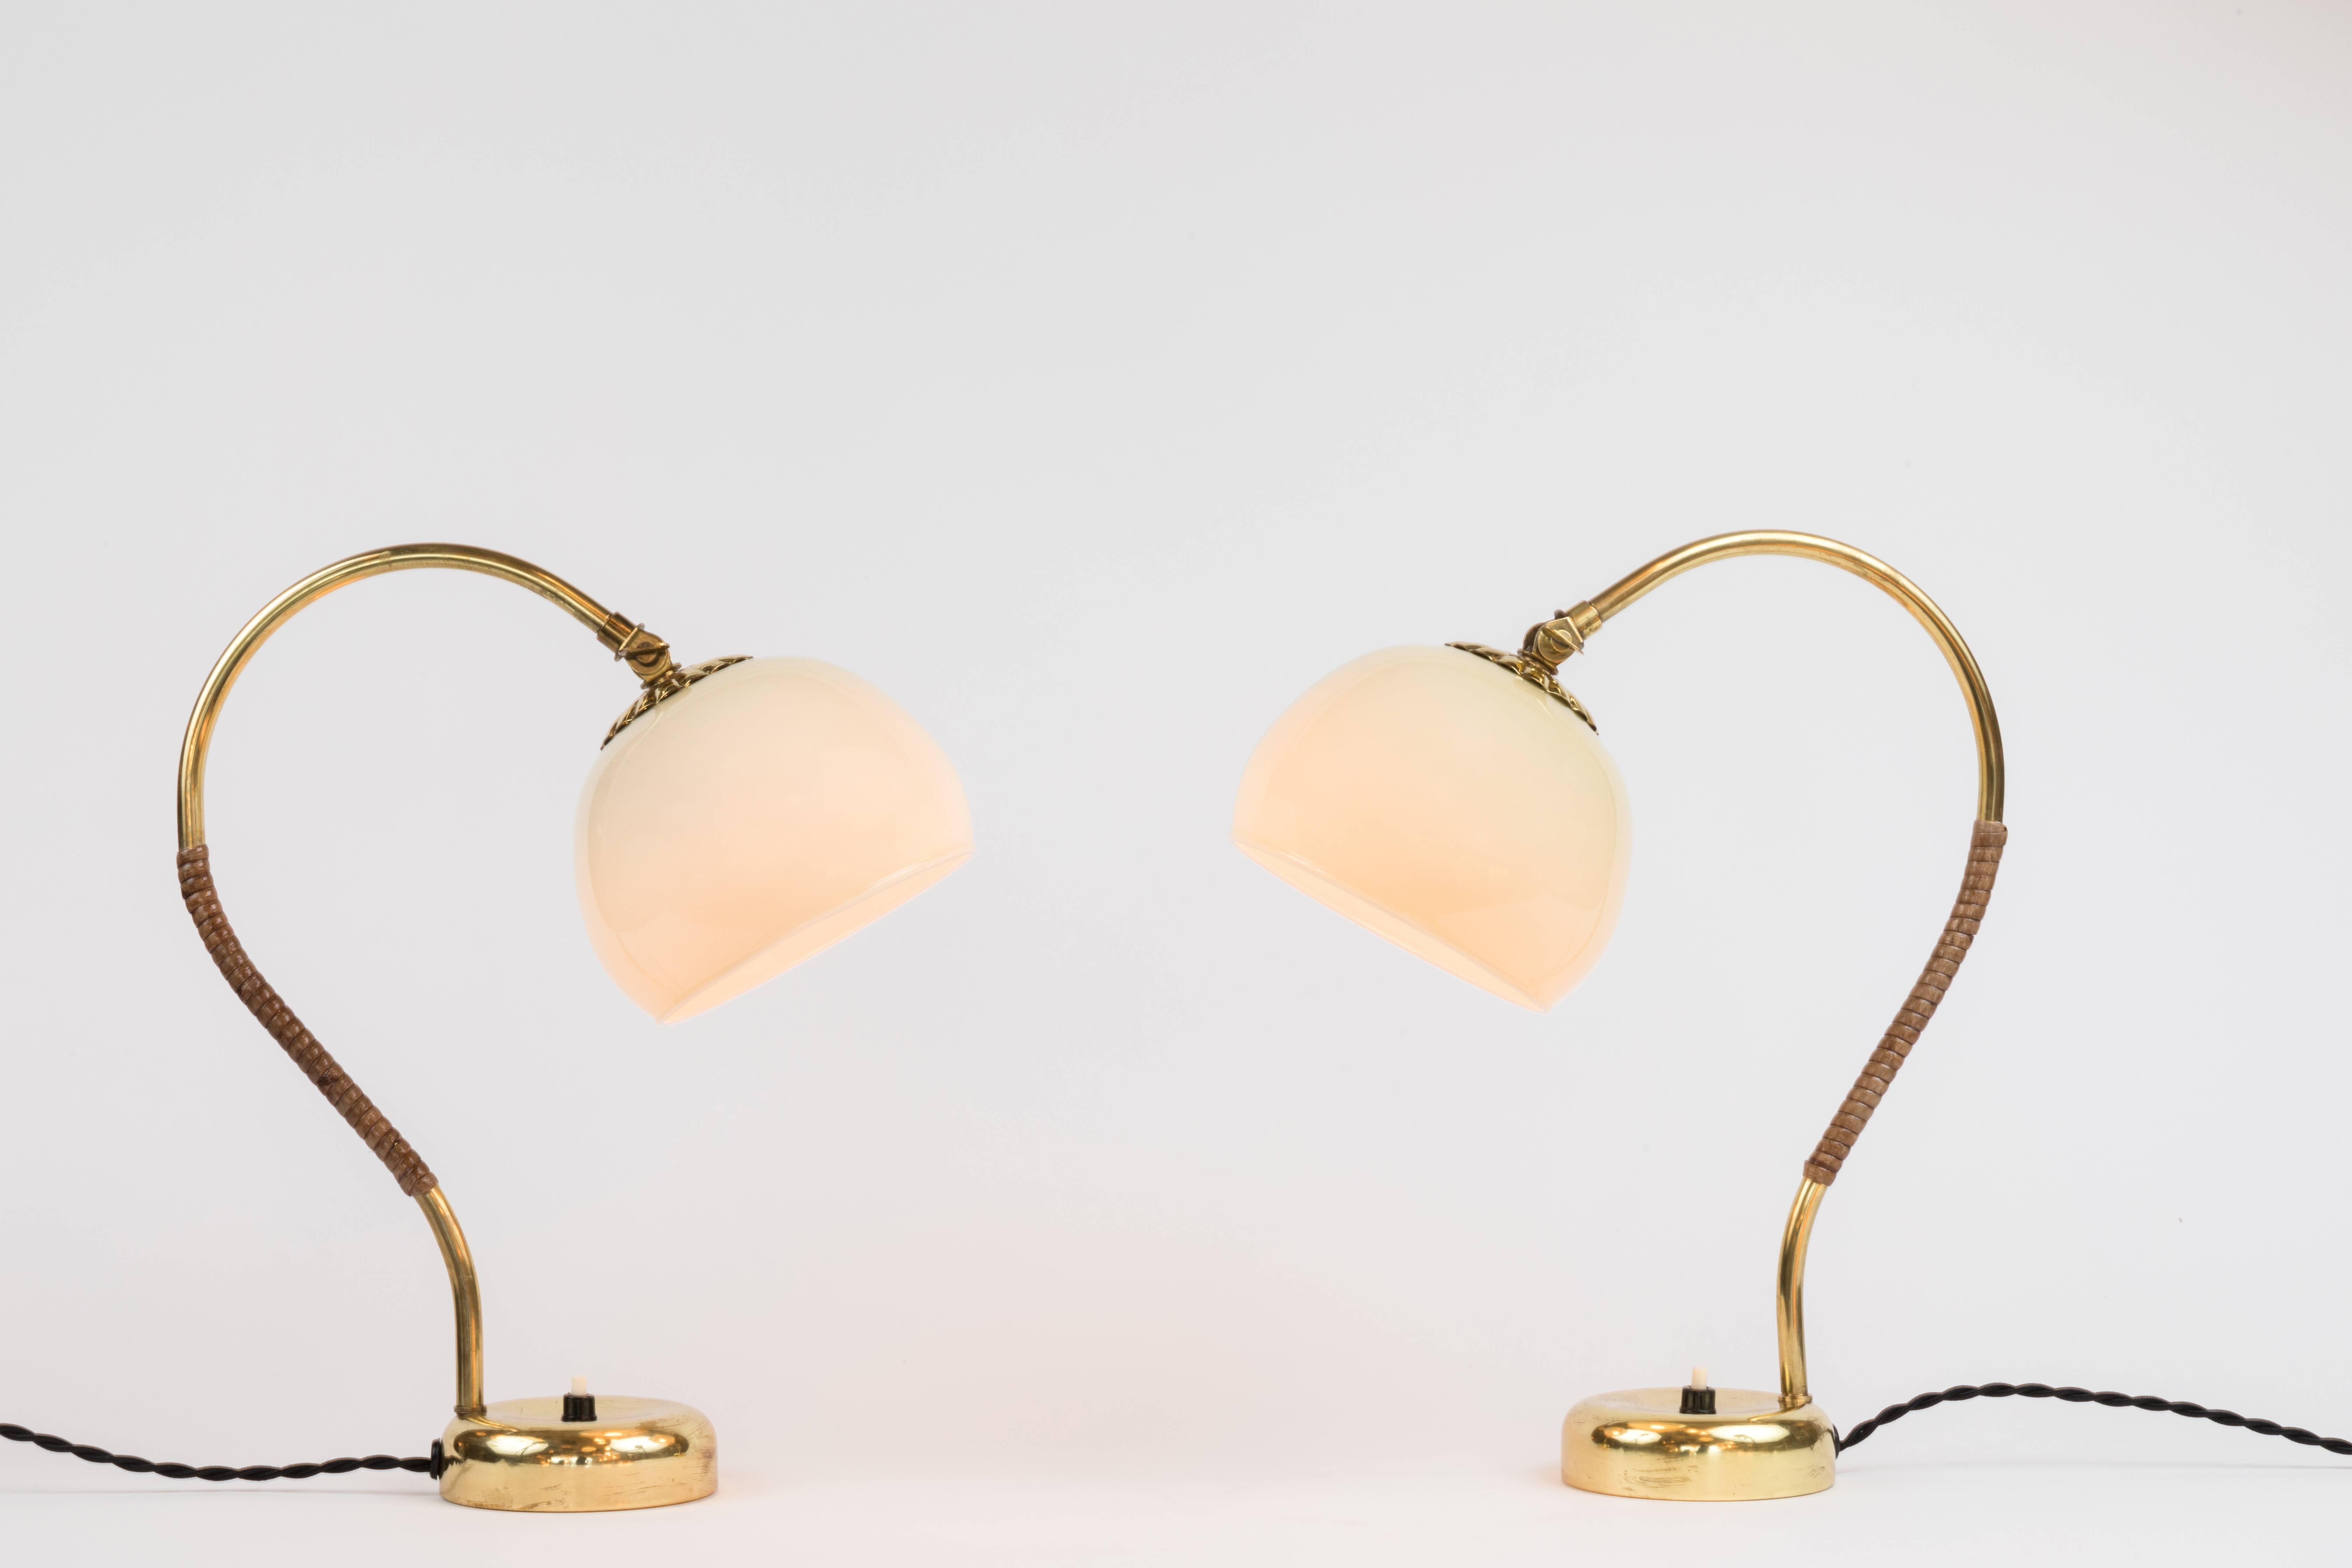 1950s Mauri Almari table lamps for Idman. A rare and elegant pair of lamps executed in brass, blown opaline glass and rattan. A contemporary of Paavo Tynell, Almari's refined work has made him an increasingly valued finish designer in recent years